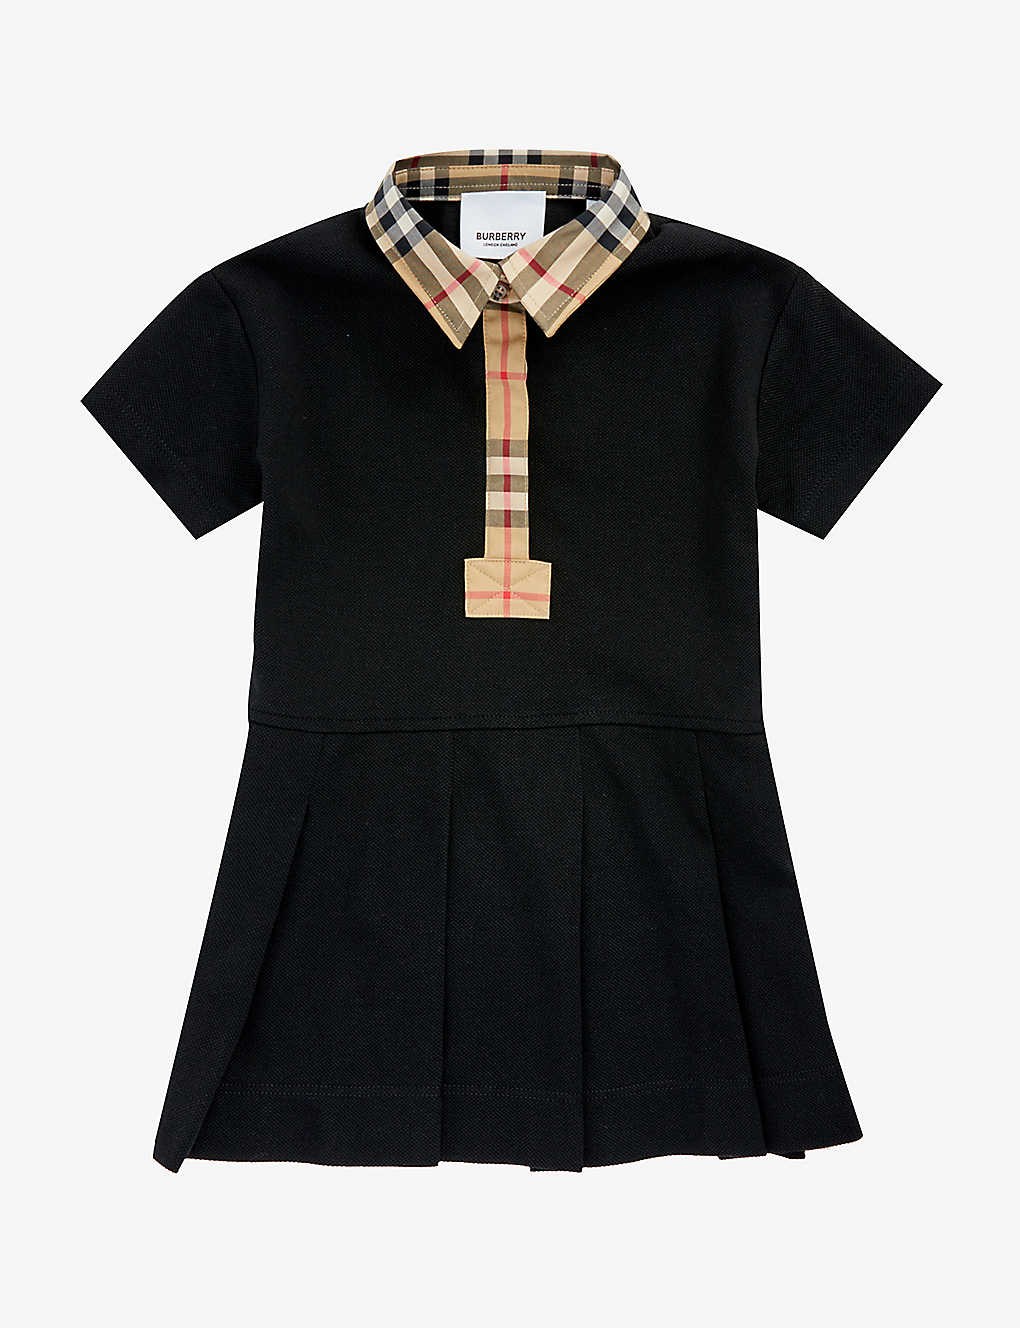 Burberry Babies'  Black Sigrid Pleated Cotton-pique Dress 6 Months - 2 Years